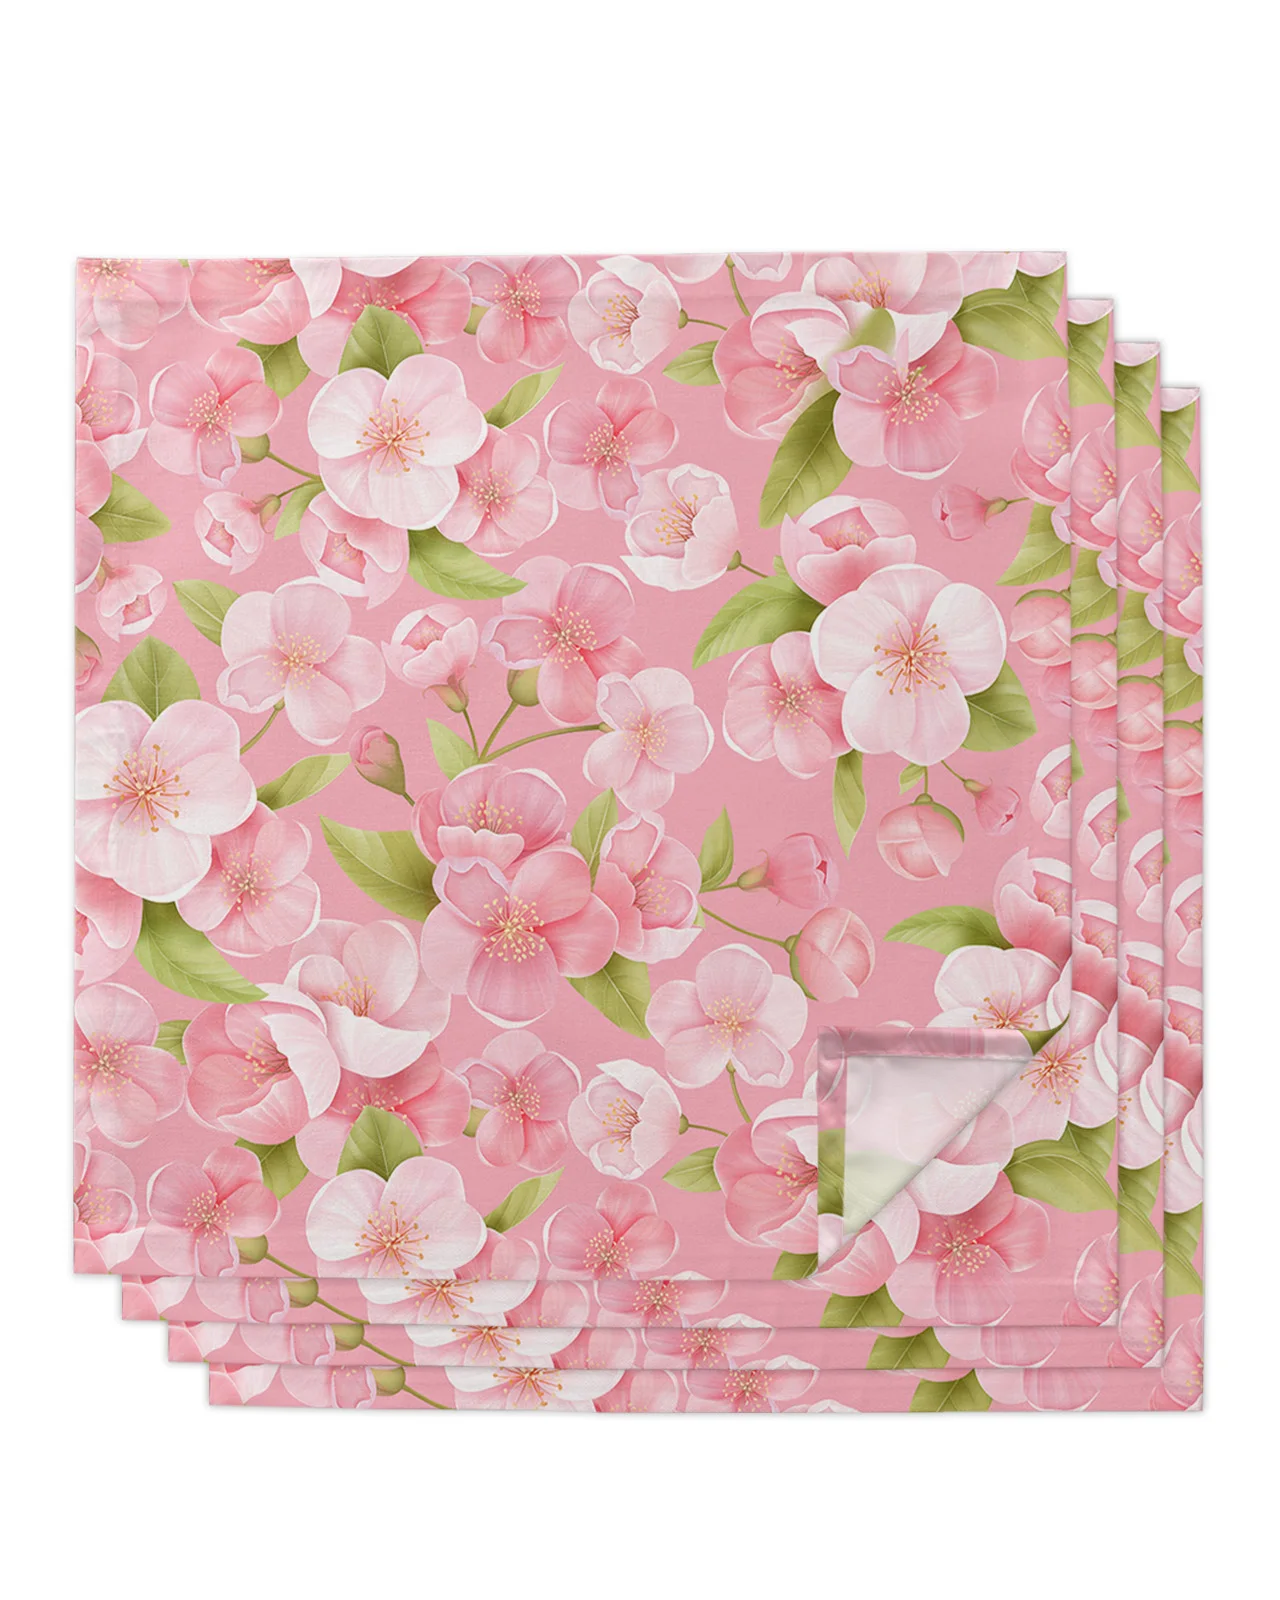 

4pcs Spring Pink Peach Blossom Square 50cm Table Napkin Party Wedding Decoration Table Cloth Kitchen Dinner Serving Napkins